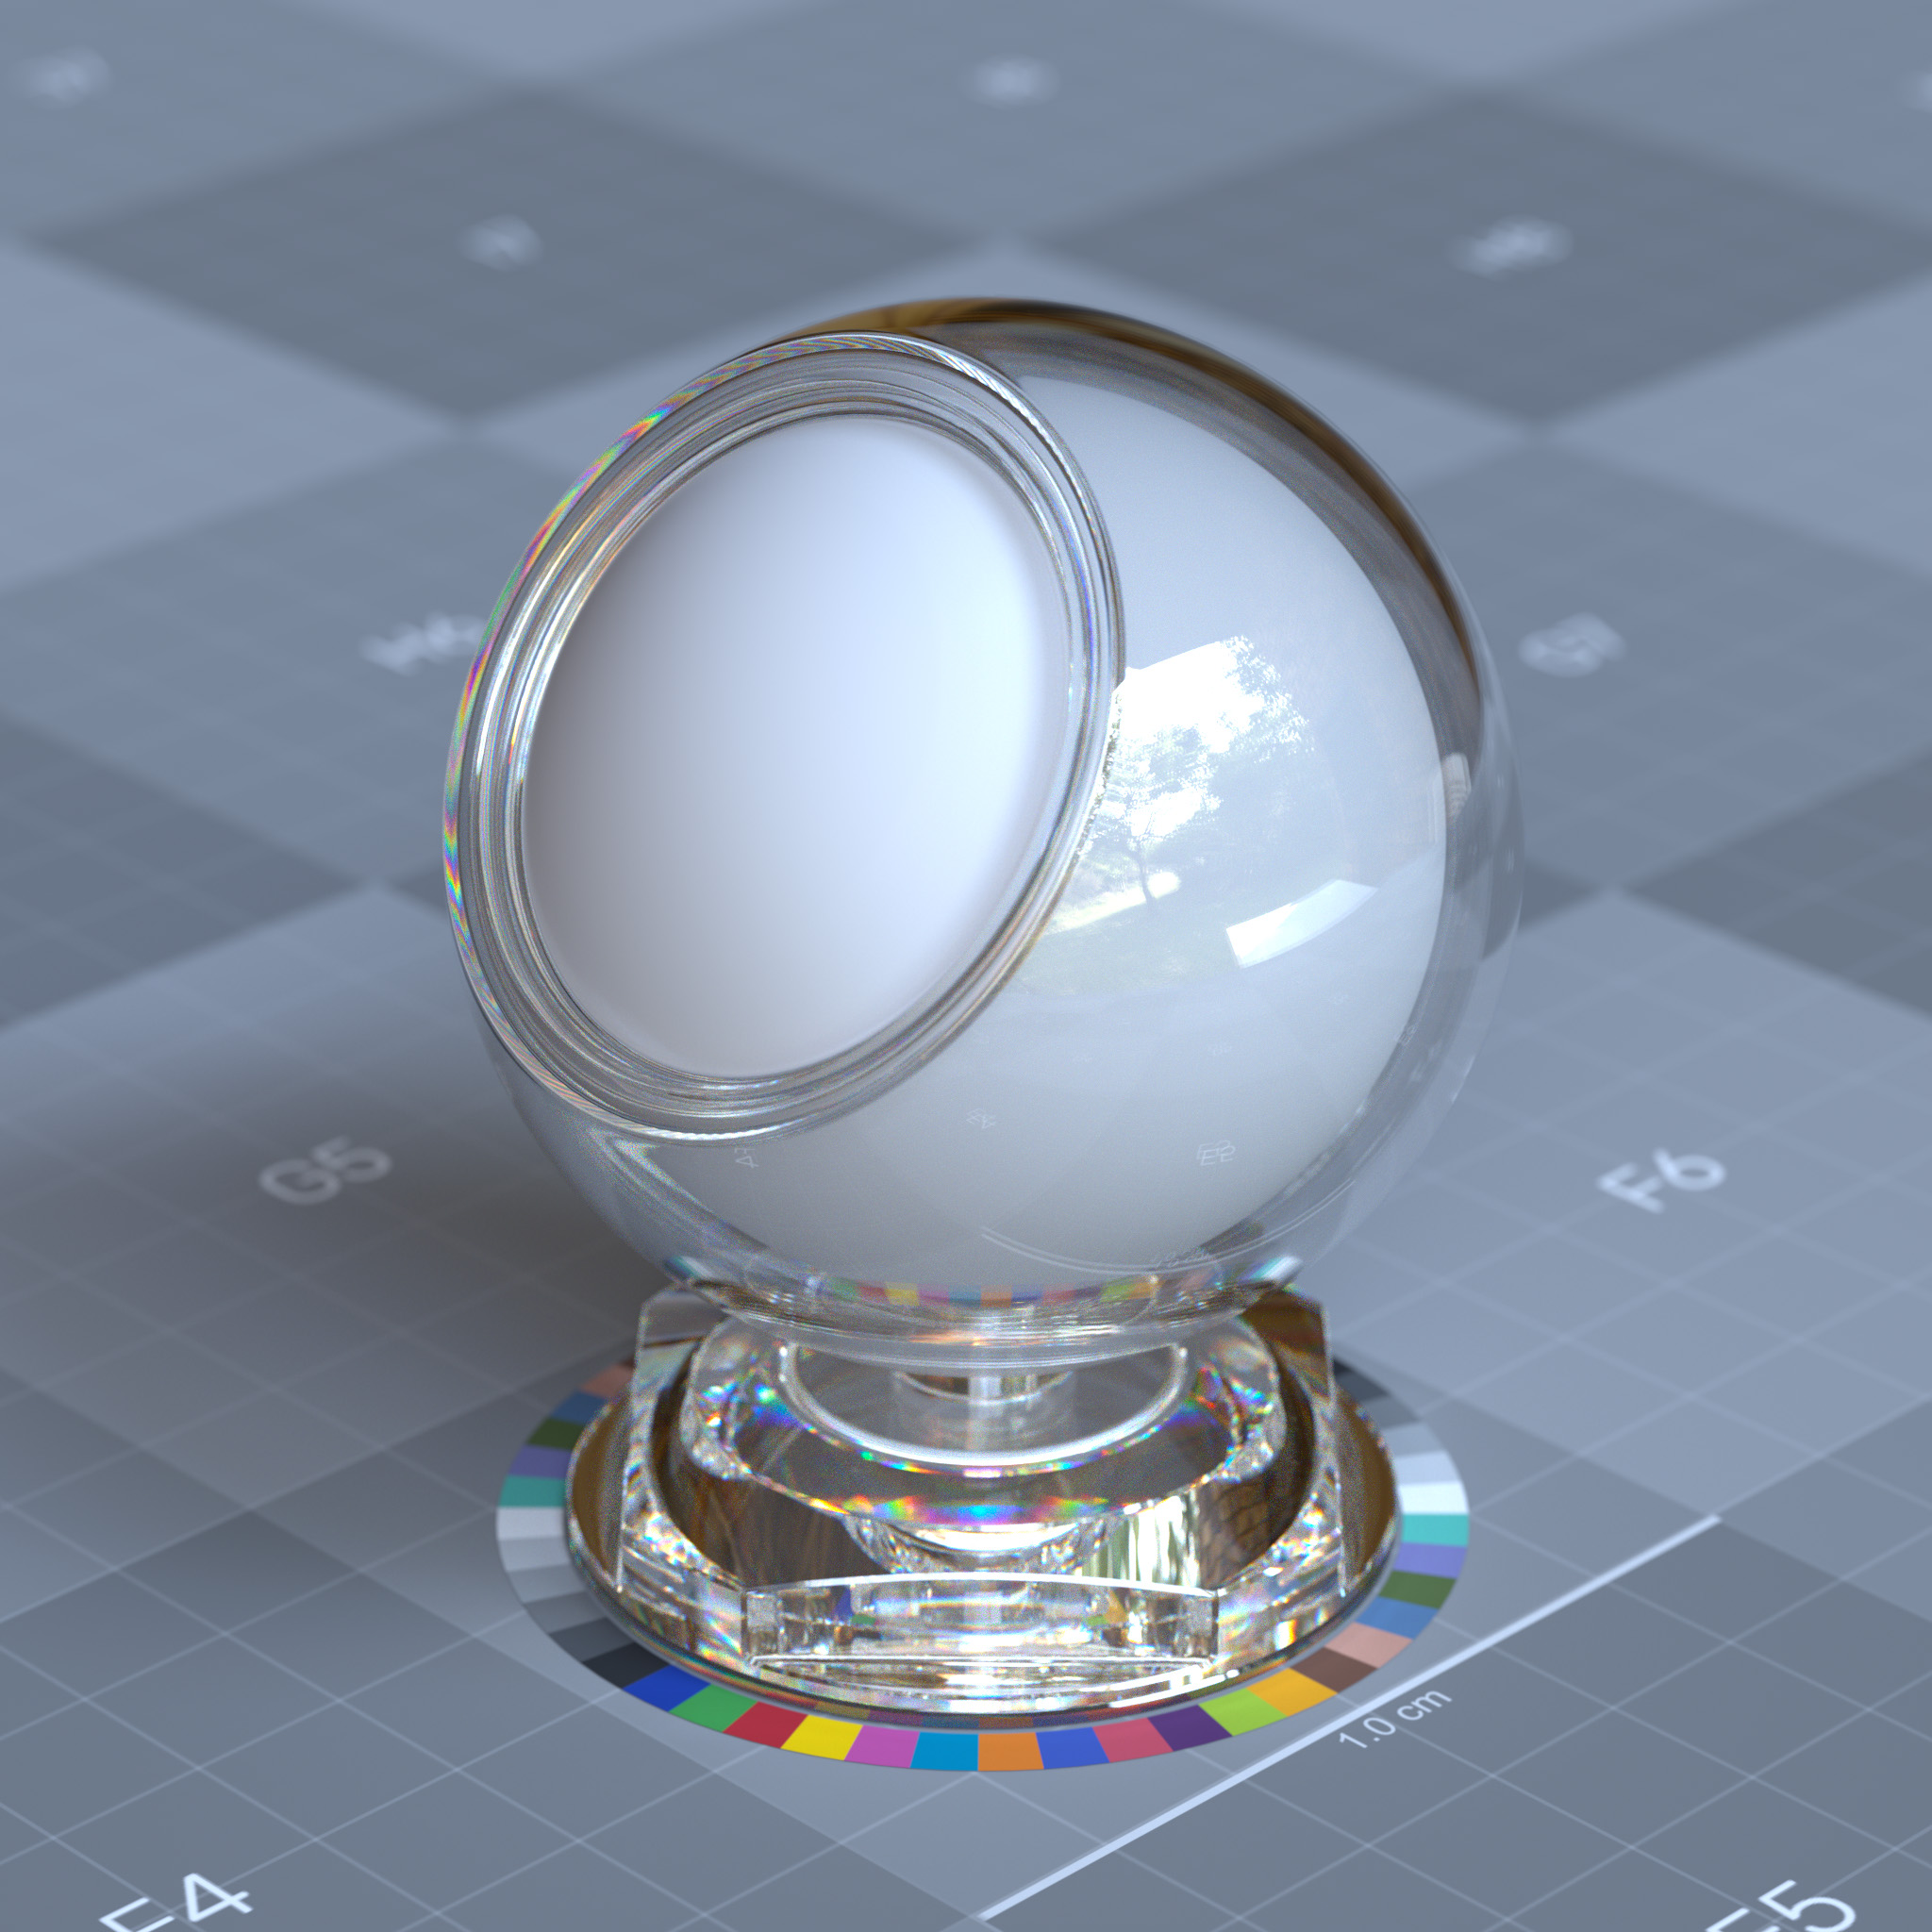 rtx_material_omnisurfacebase_specular_transmission_abbe_10